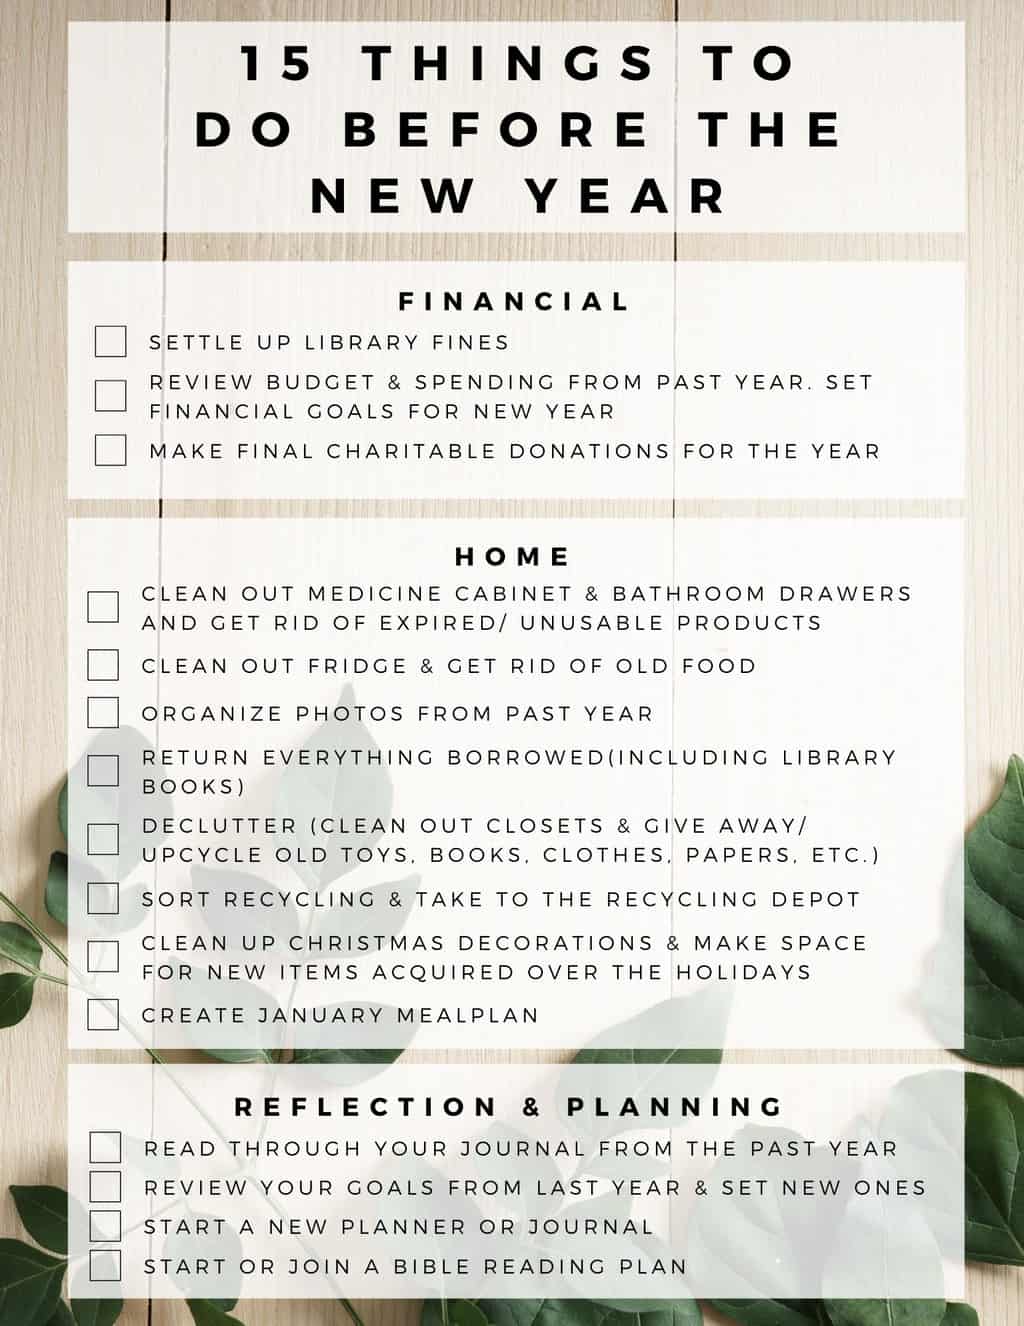 15 things to do before the new year